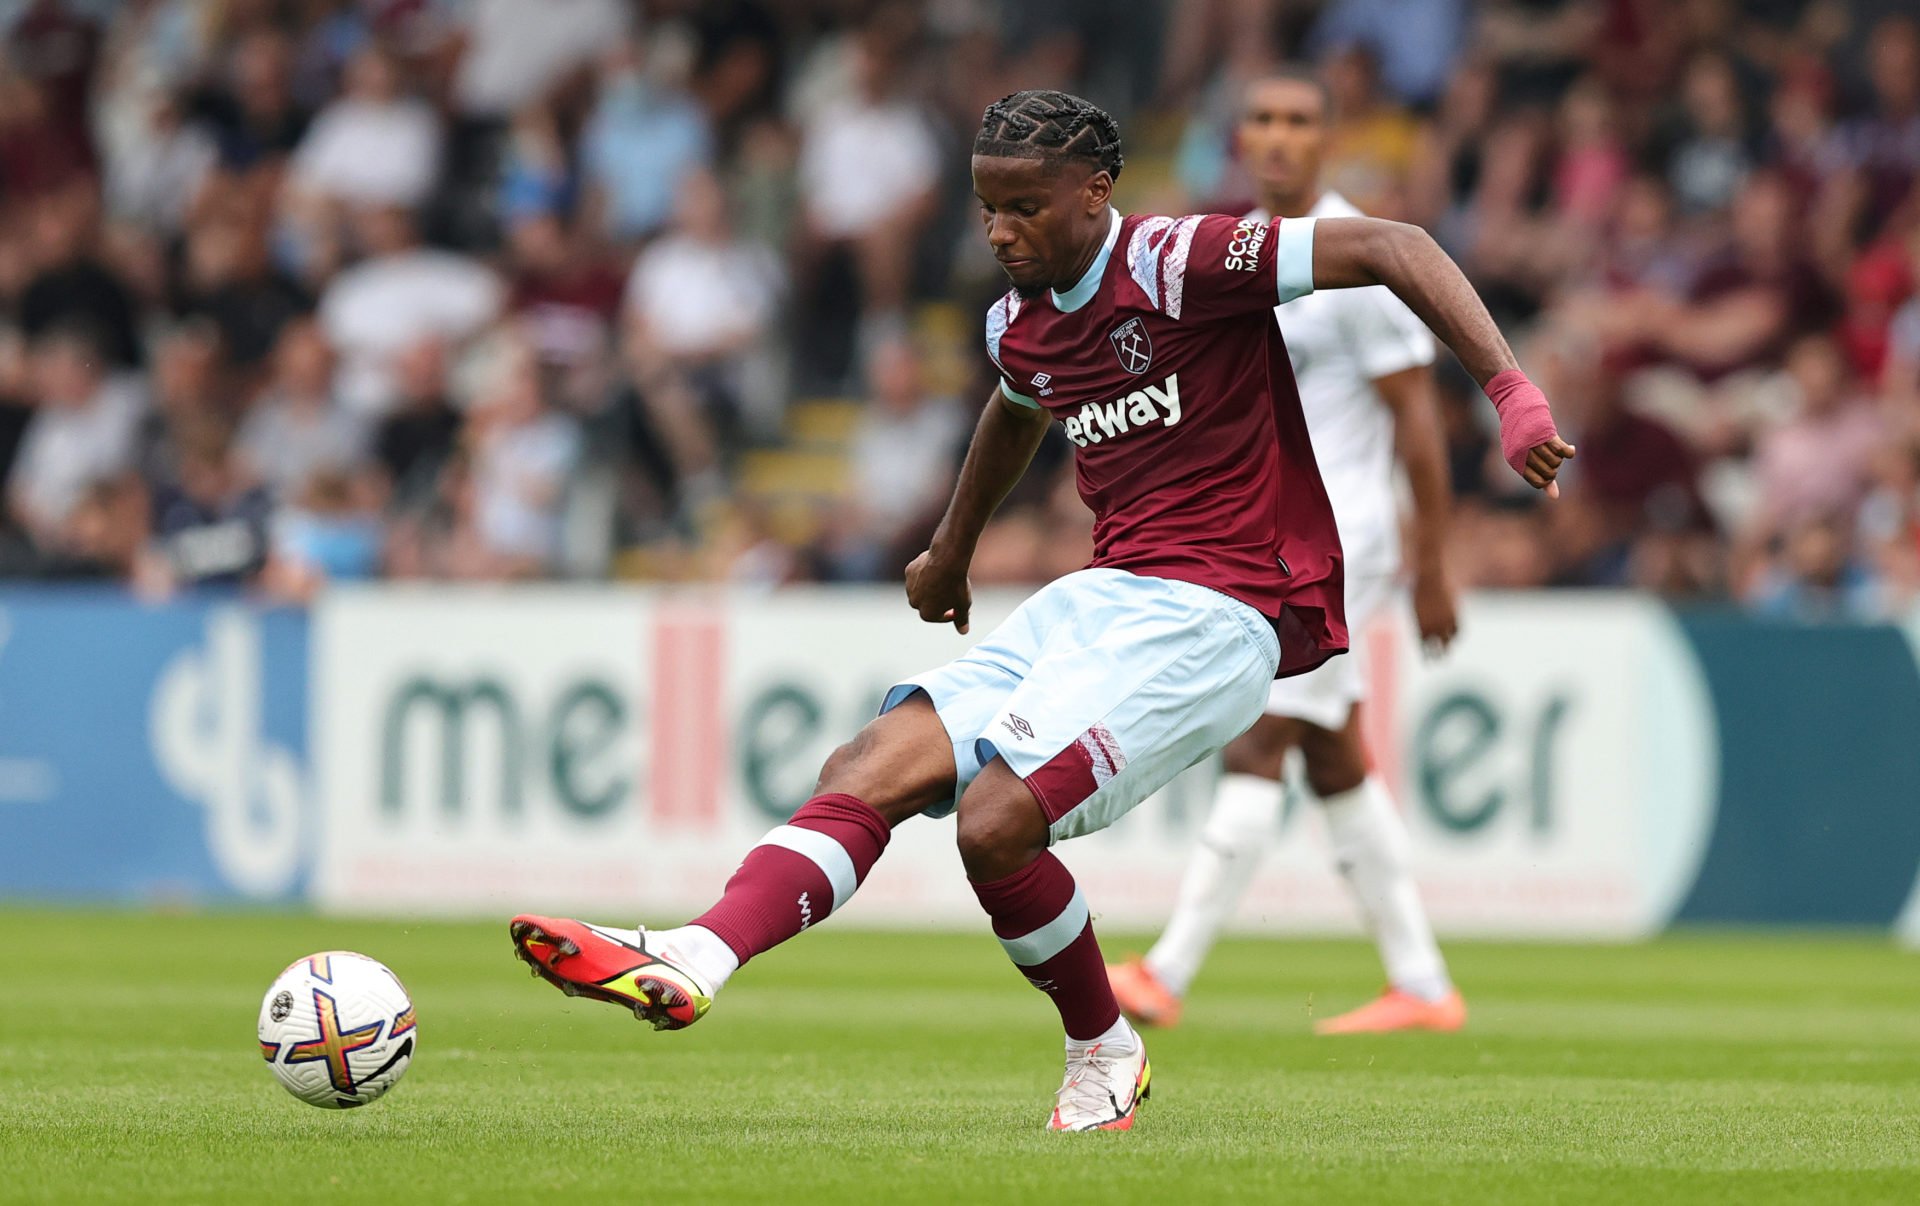 Pierre Ekwah seems to be a real star of the future for West Ham United